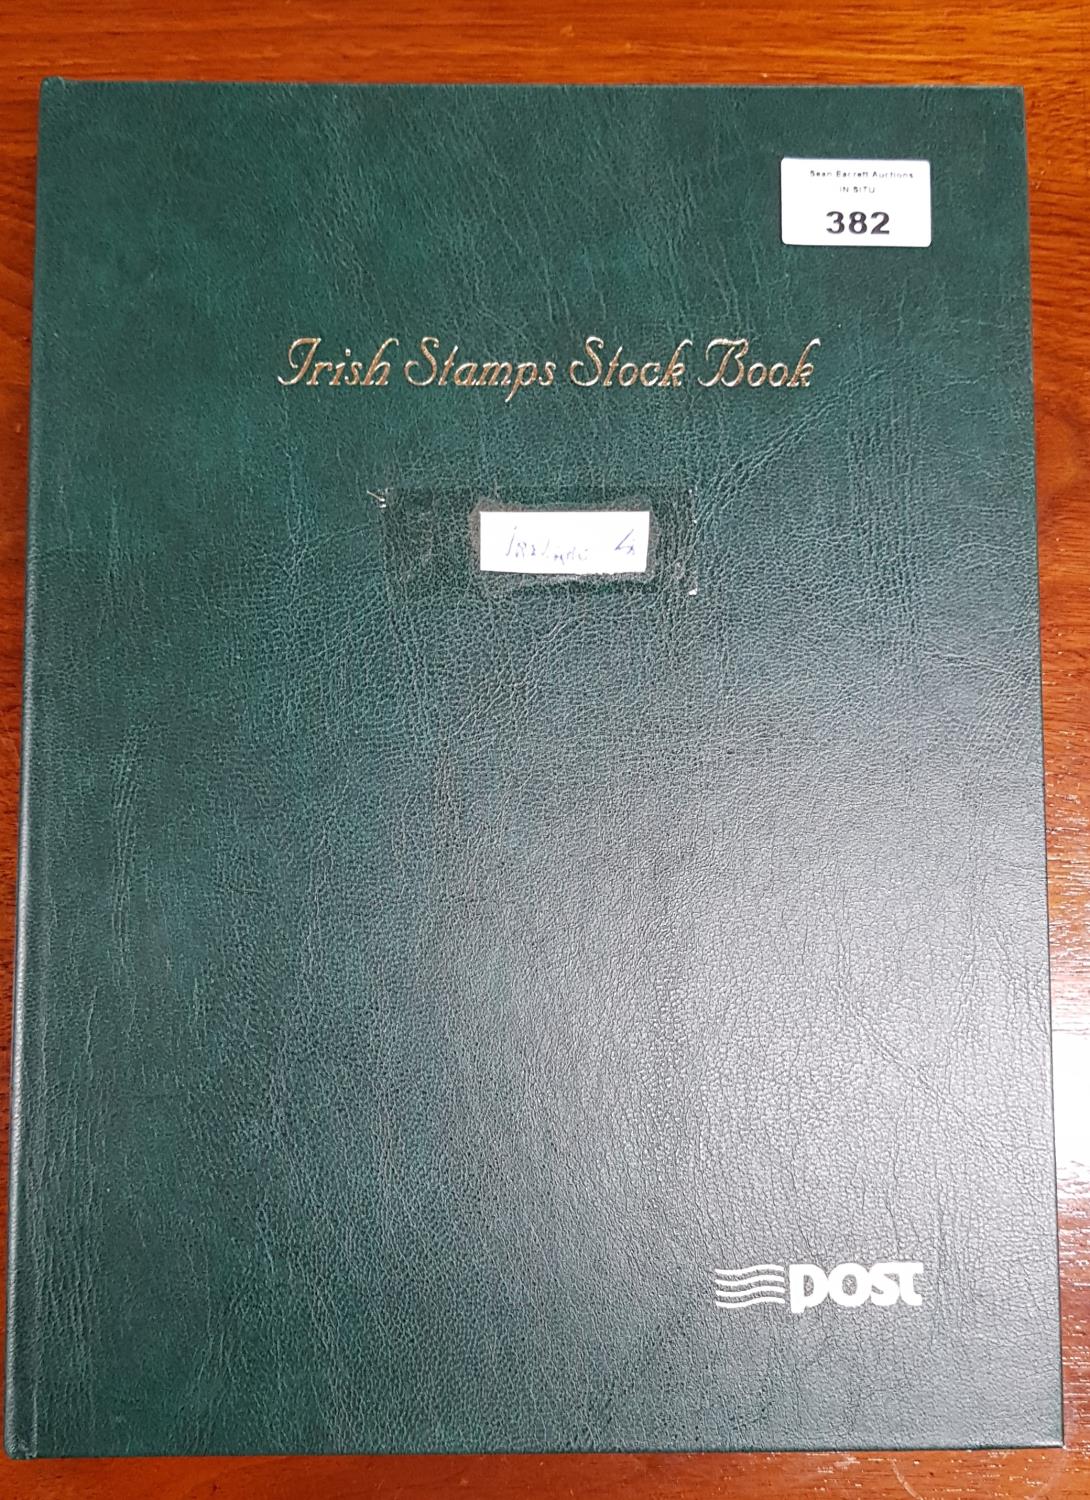 A Stock Book containing Stamps from Ireland and United Nations including sheetlets.